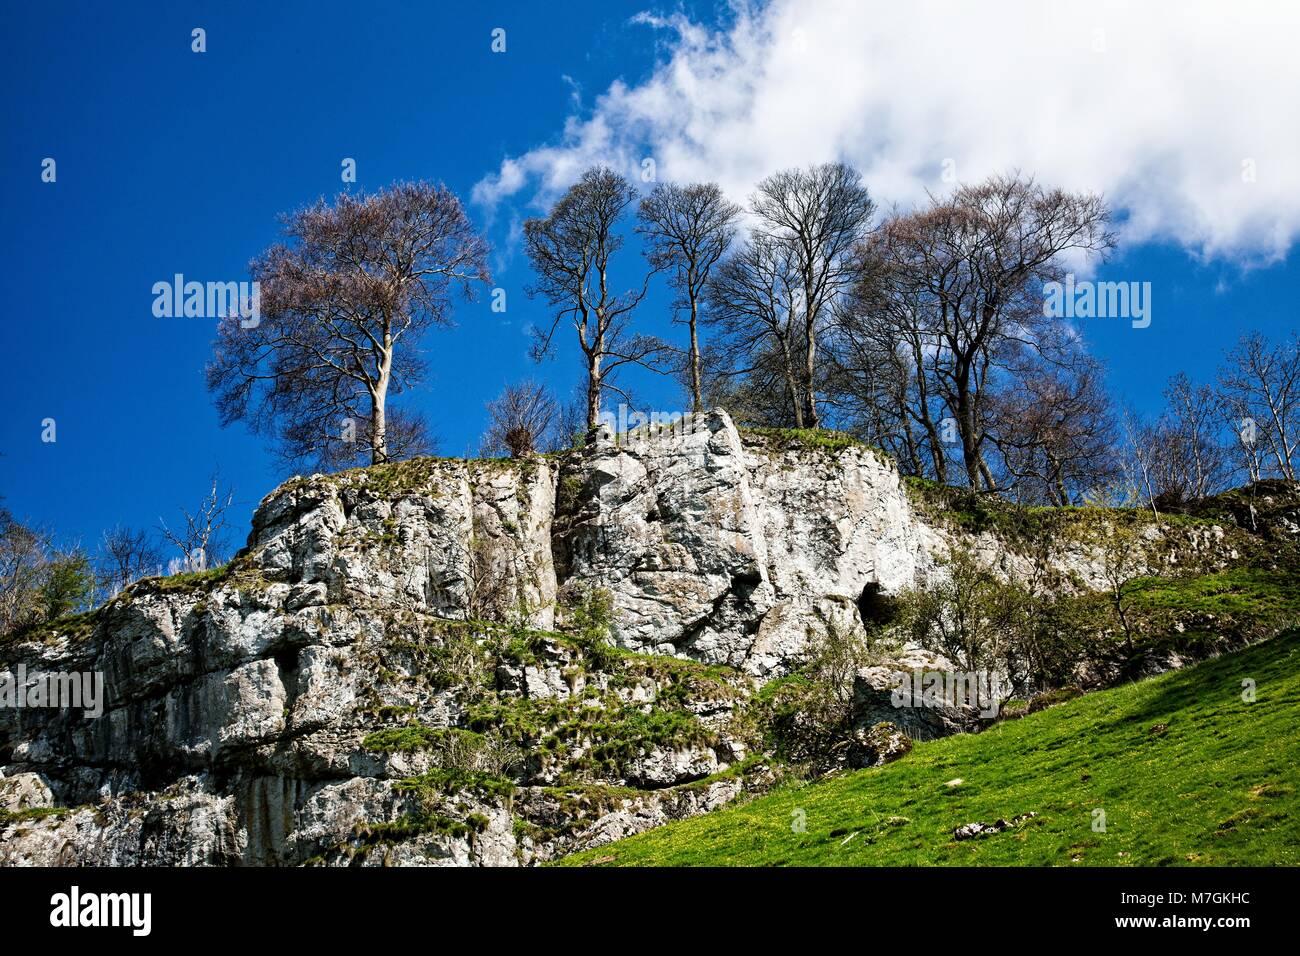 TREES SET AGAINST THE SKY SURMOUNTING A LIMESTONE SCARP IN THE PEAK DISTRICT NATIONAL PARK, ENGLAND Stock Photo